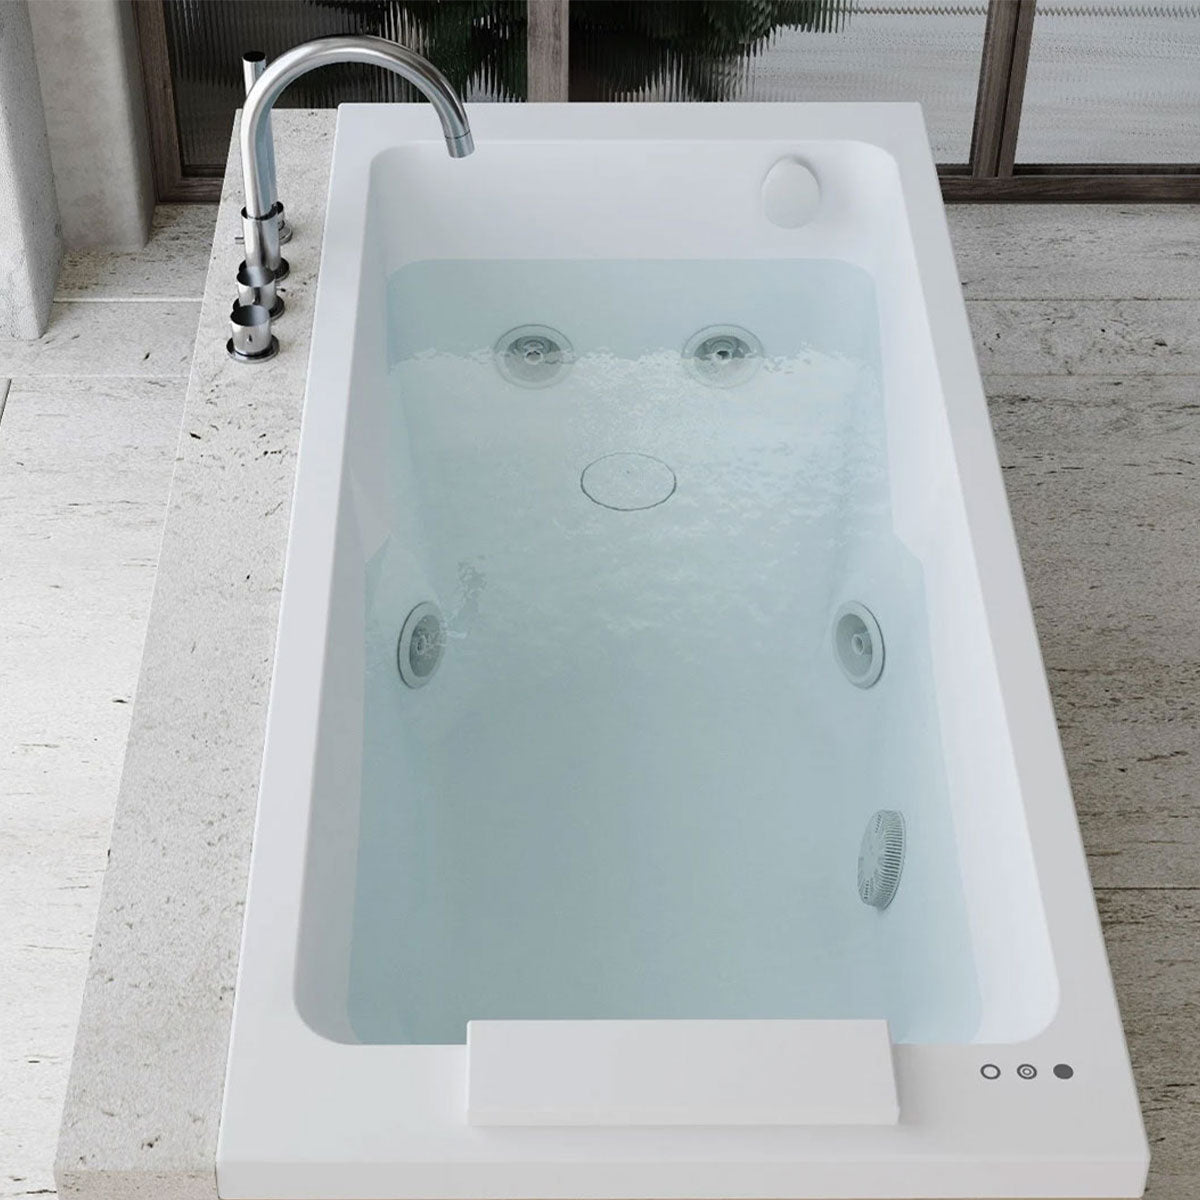 Jacuzzi Sharp Whirlpool Bath With Full Body Hydromassage Feature